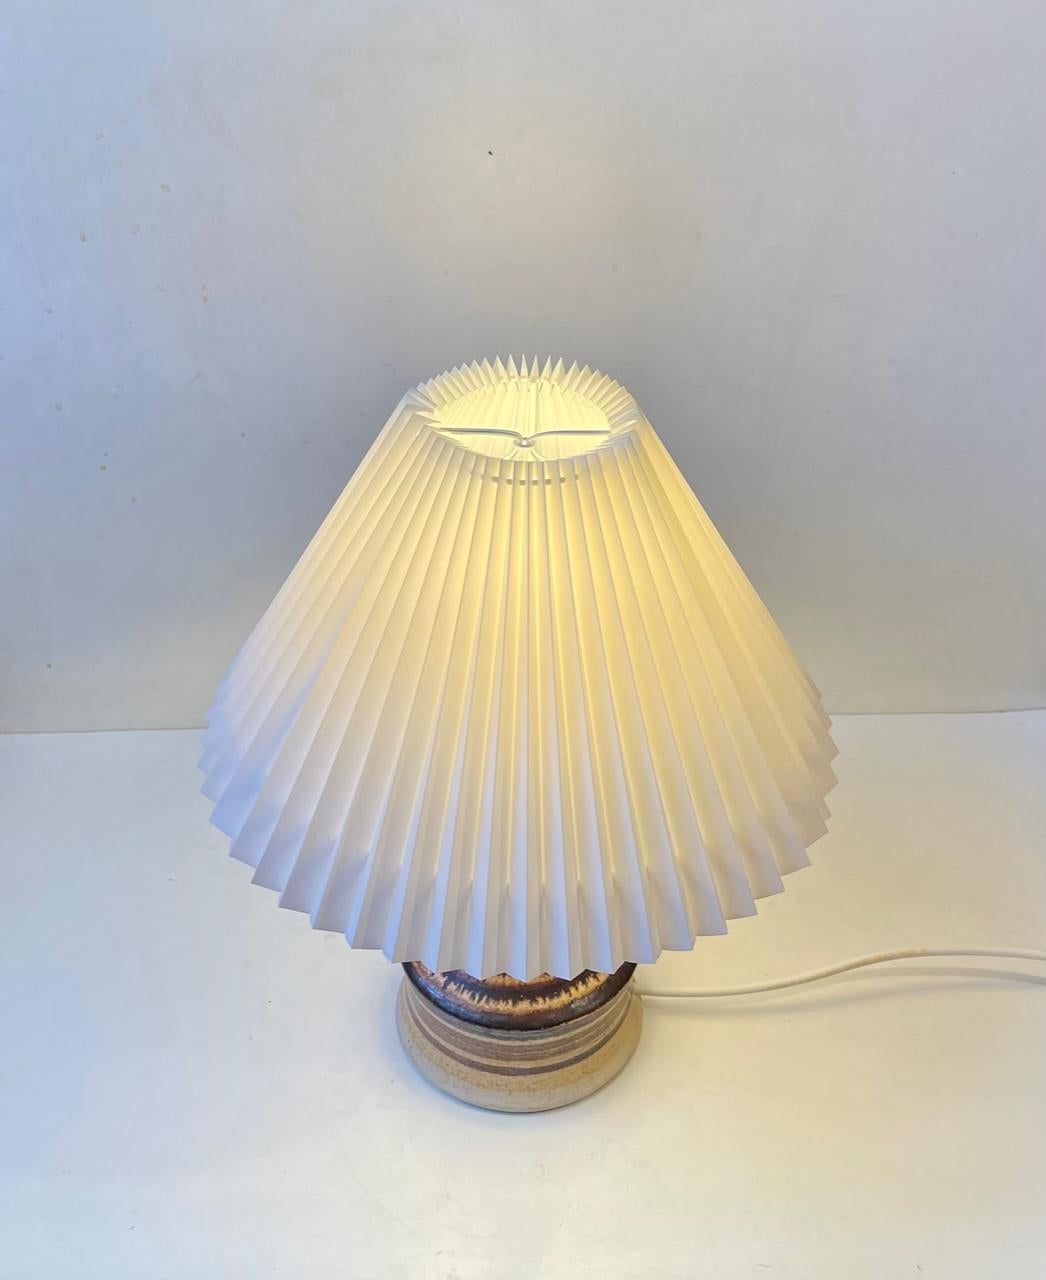 Late 20th Century Italian Modern Table Lamp in Ceramic with Earthy Glaze Stripes, 1970s For Sale